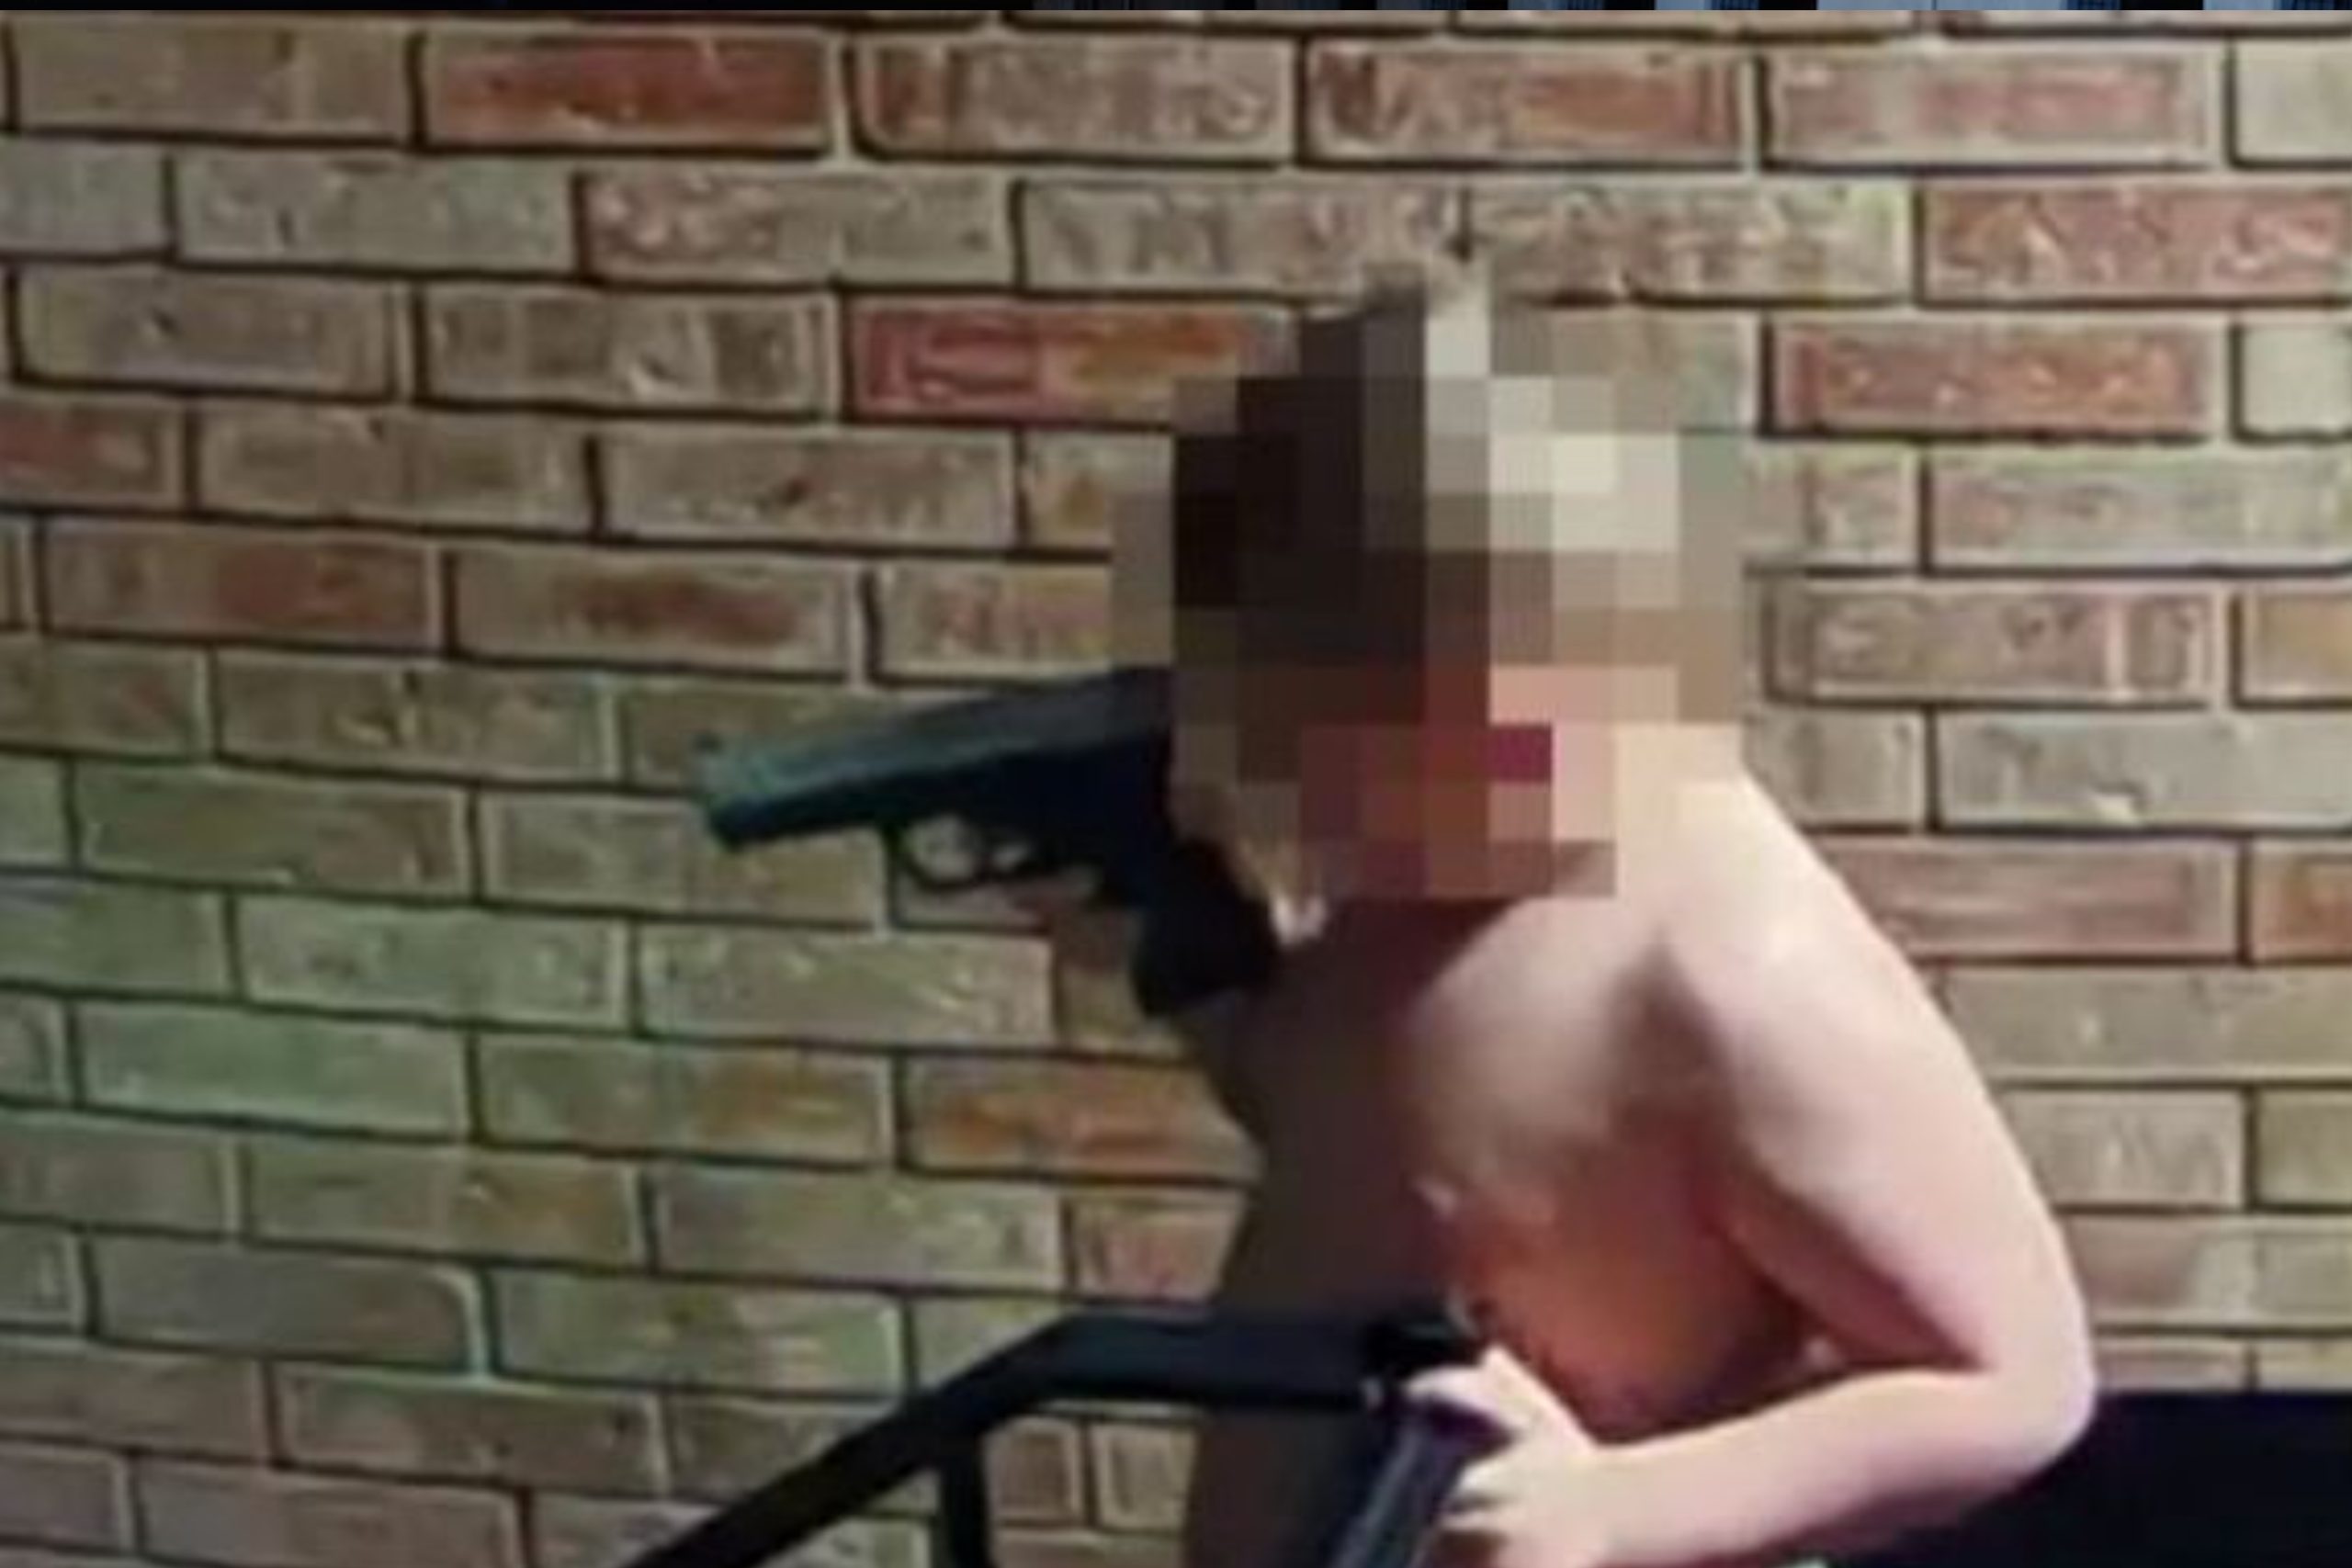 Watch: 4-Year-old child plays with loaded gun on live TV. Indiana father gets arrested.